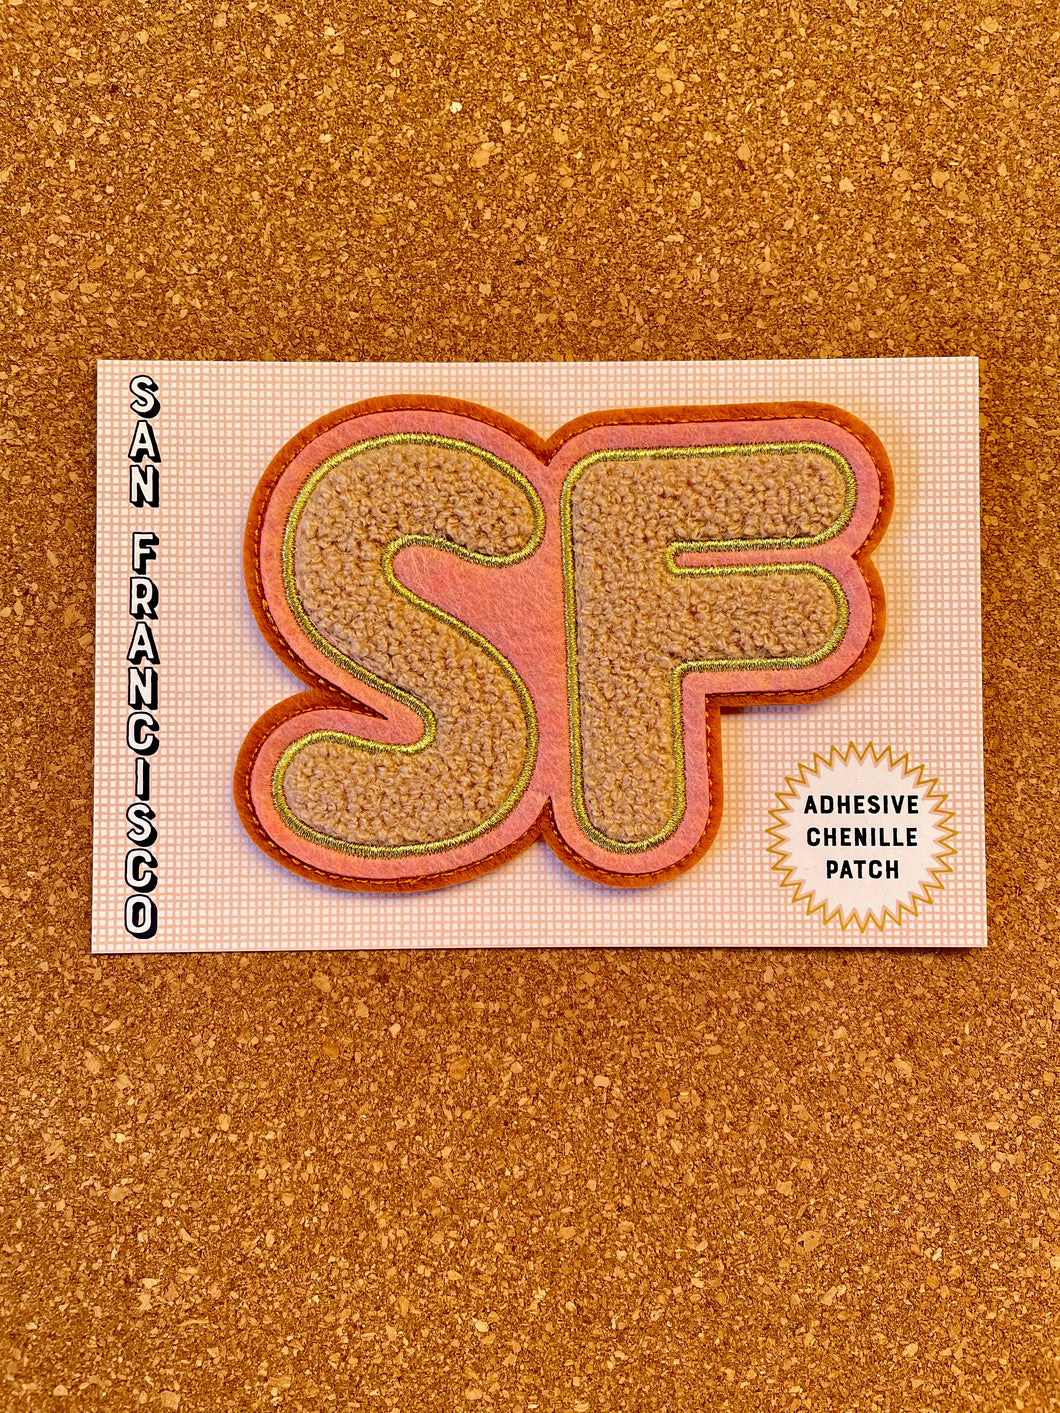 SF San Francisco Chenille Patch